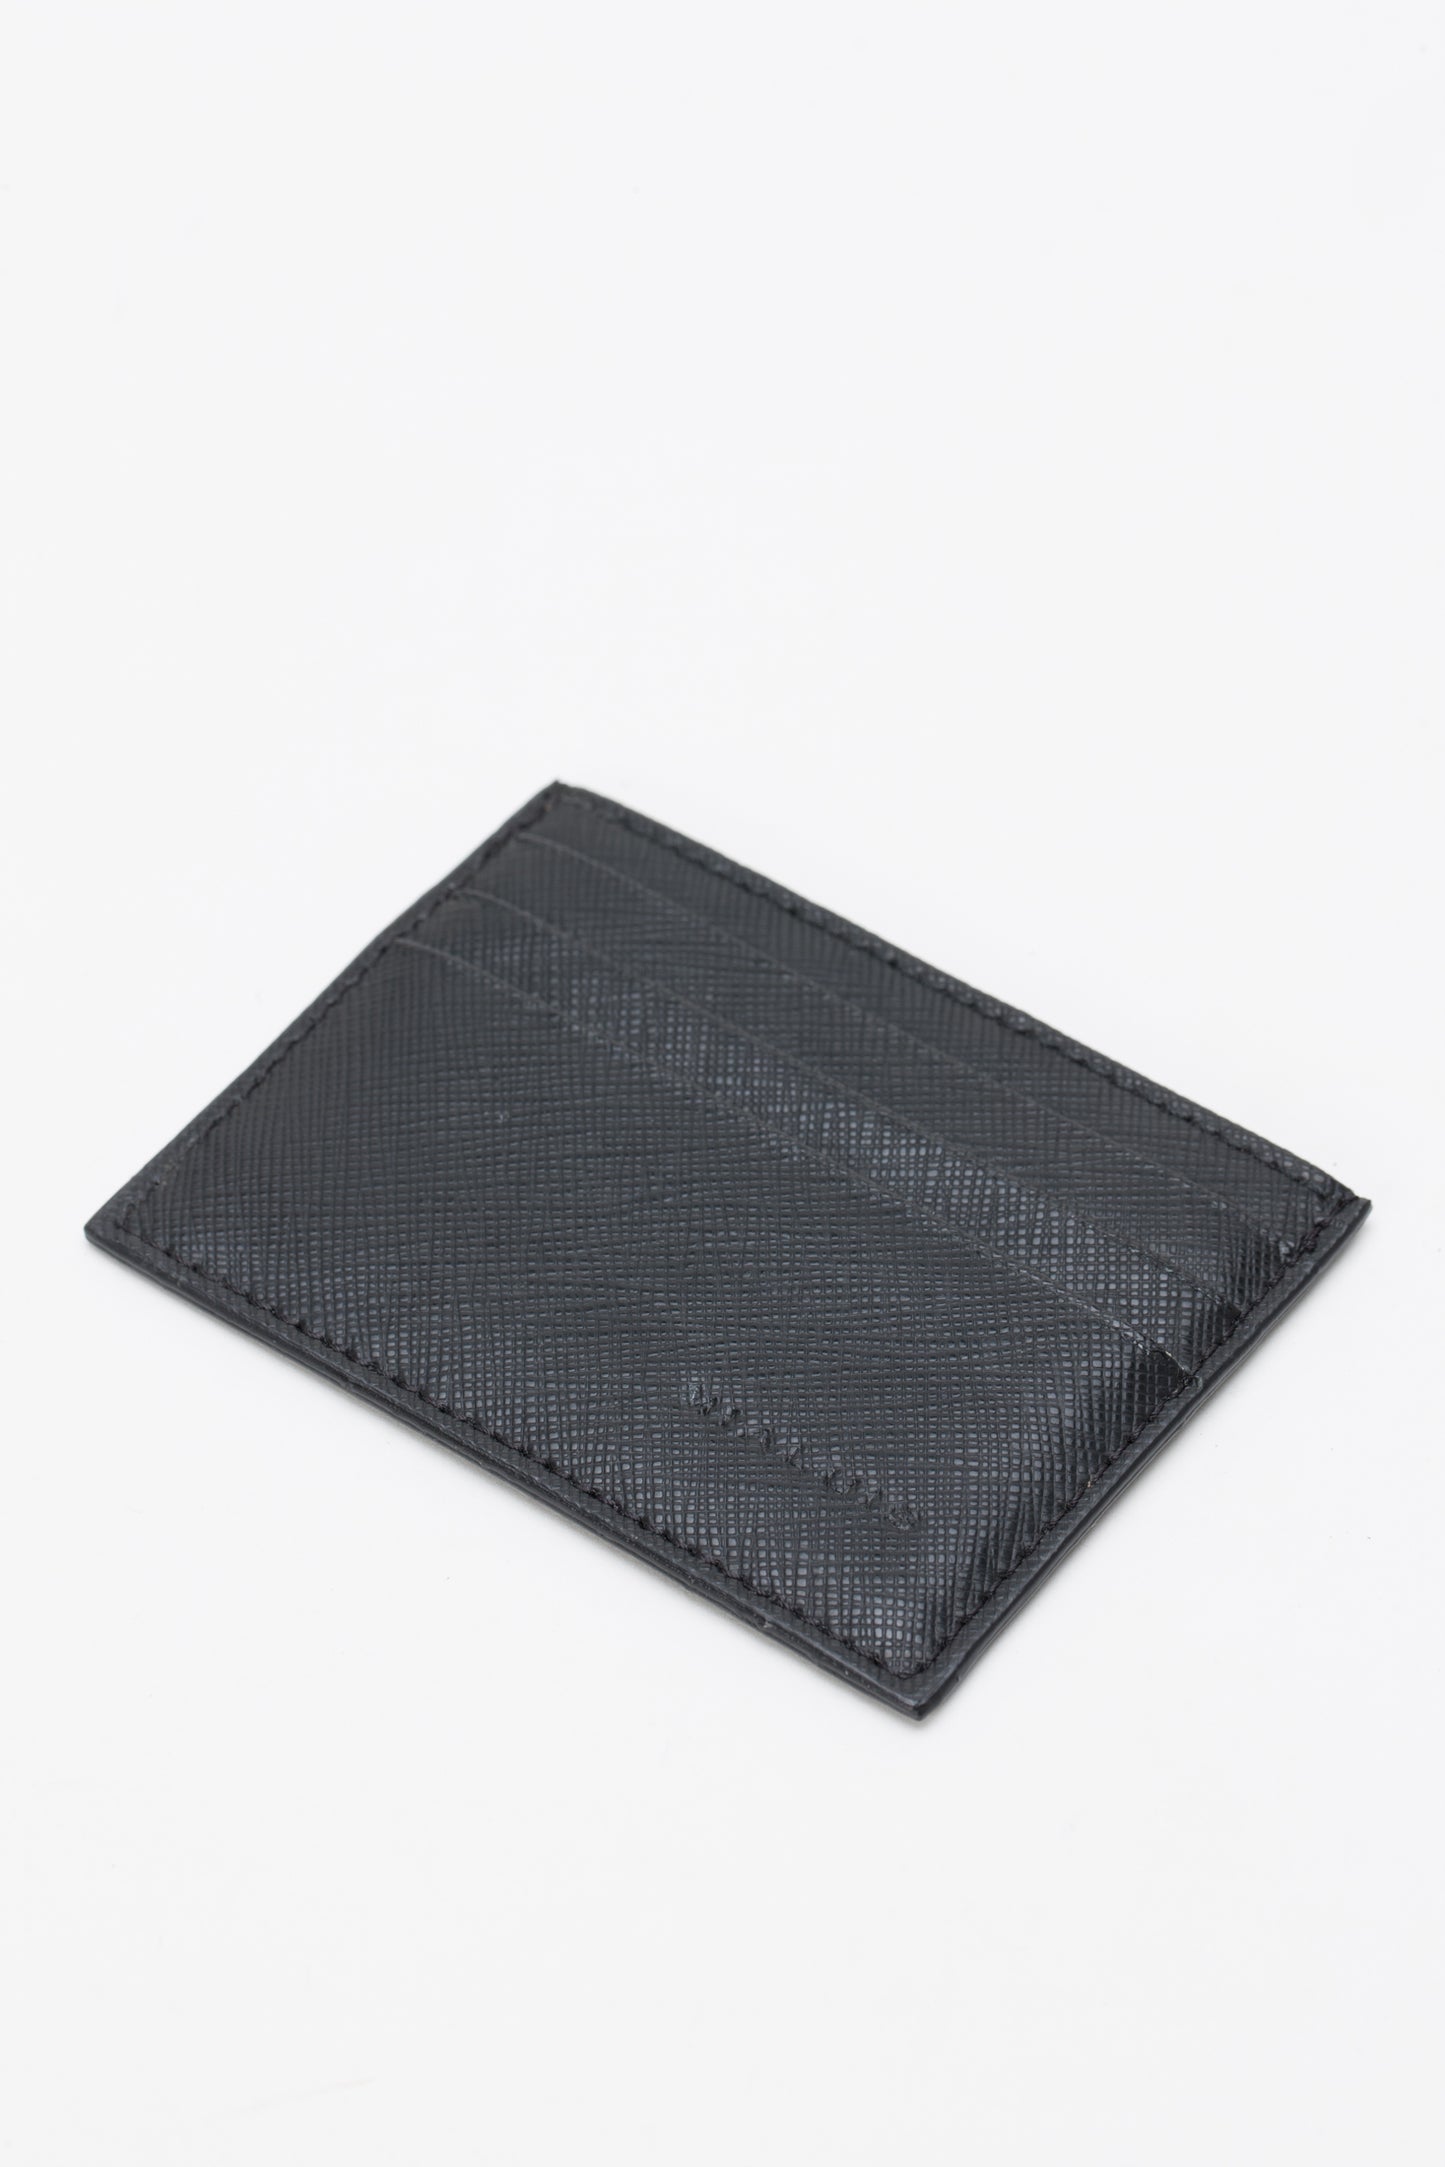 Card holder in leather